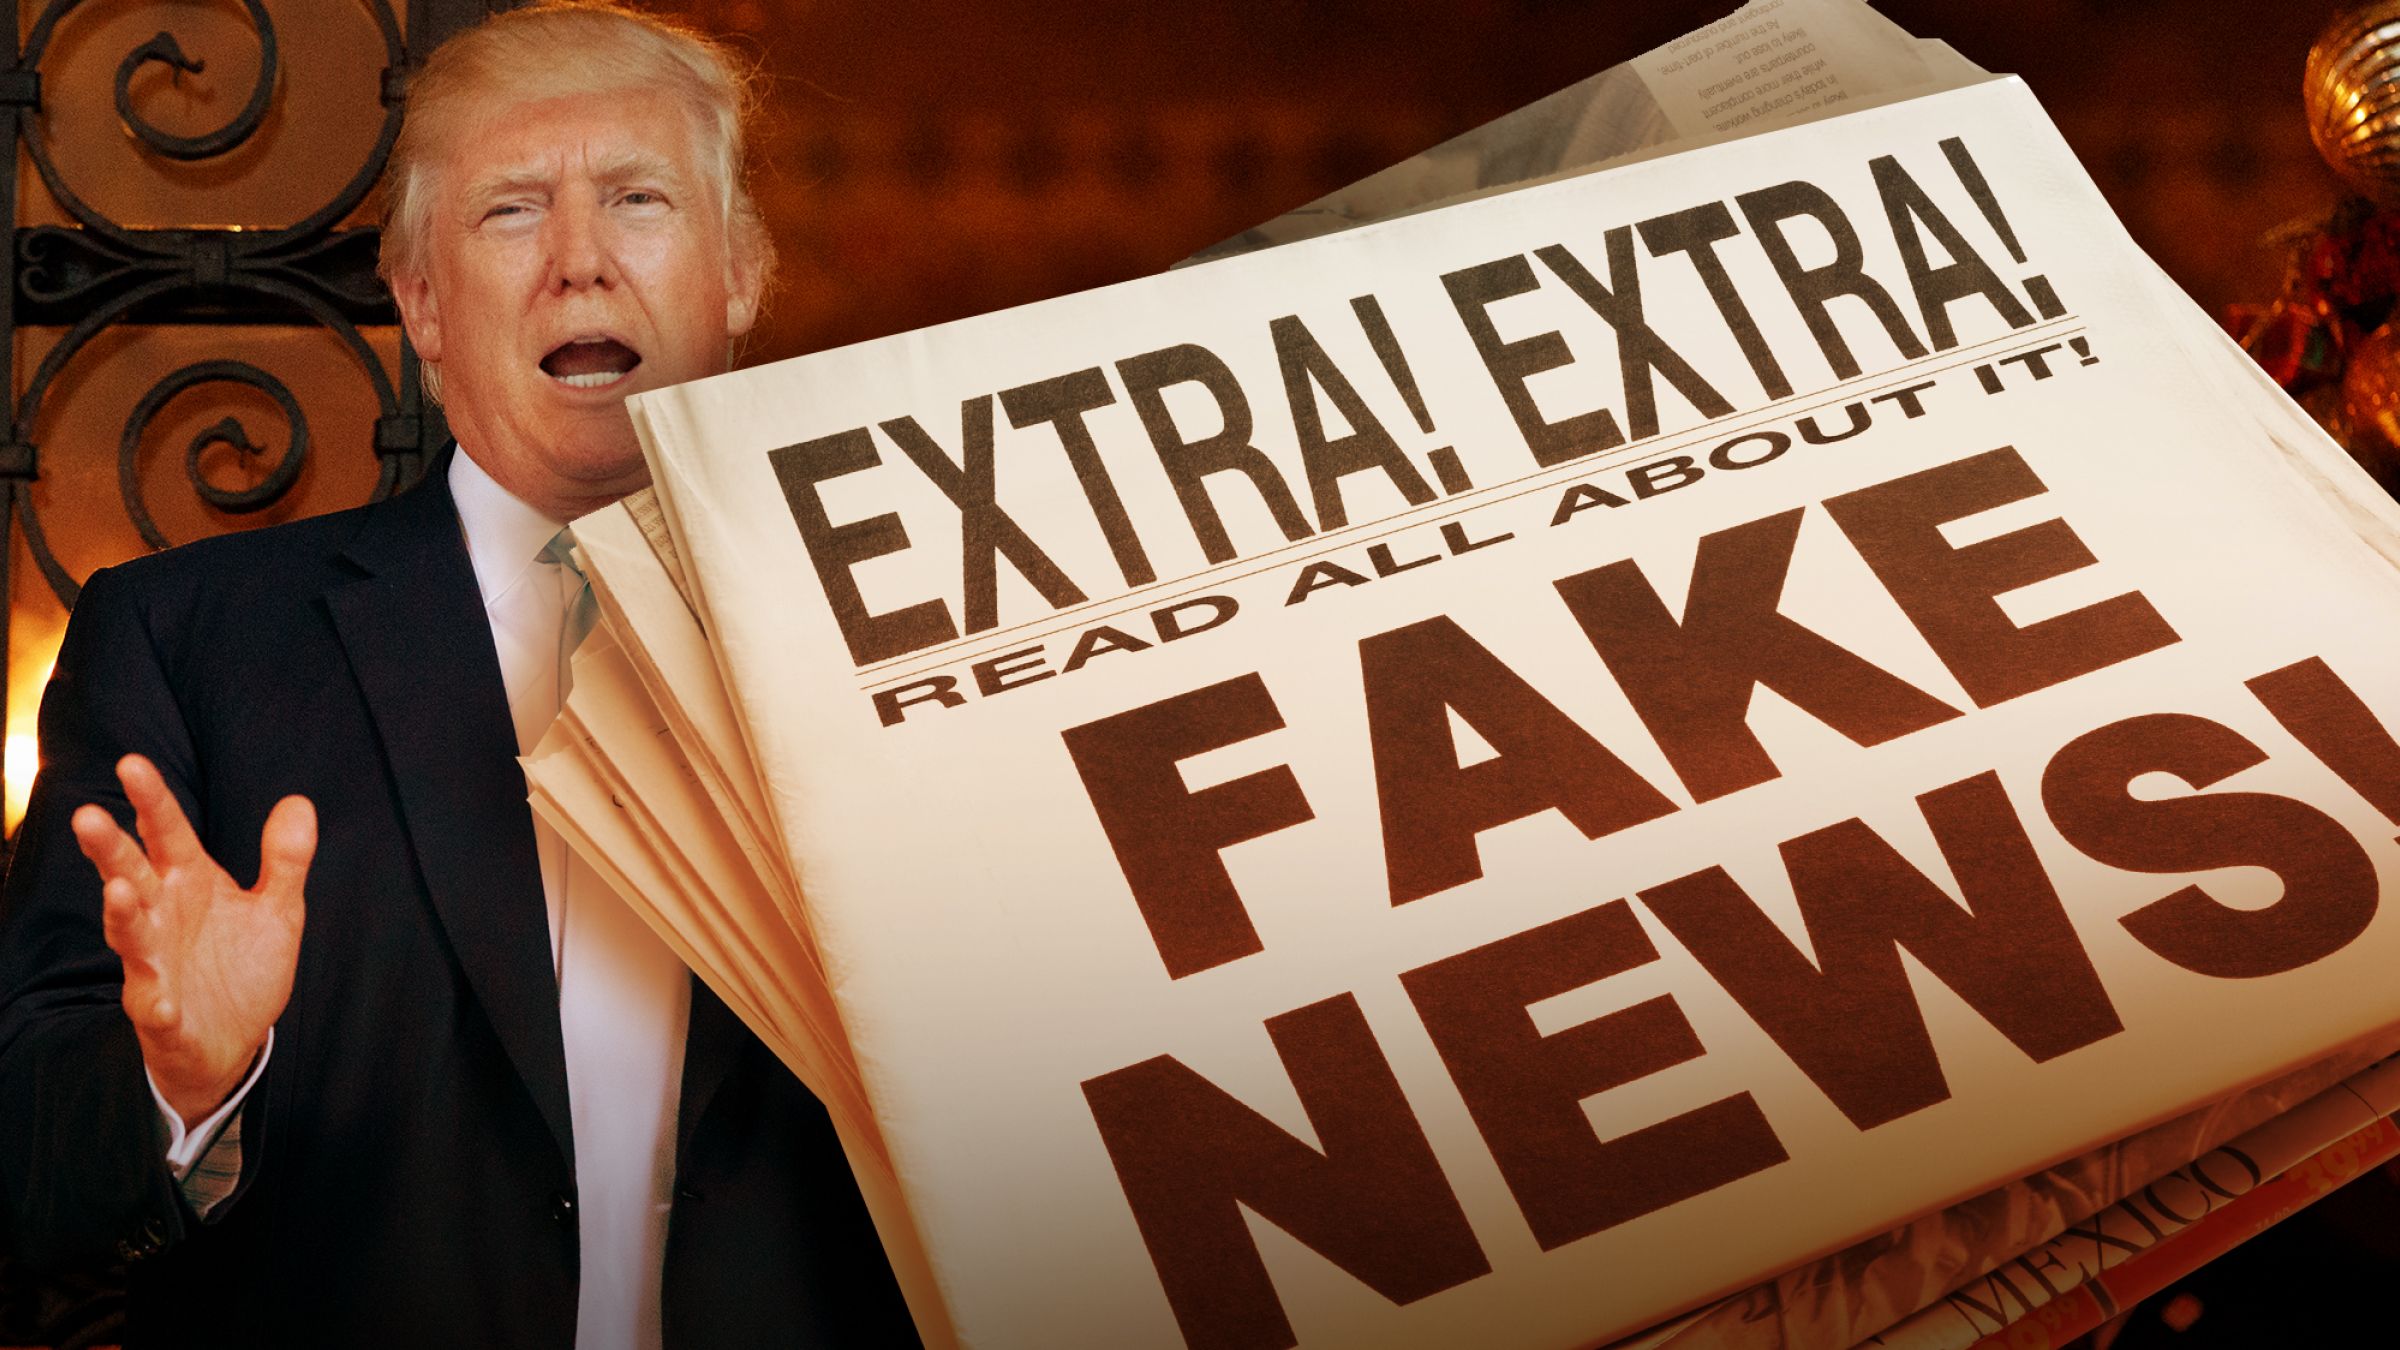 Even real news is fake because of internet content decontextualization